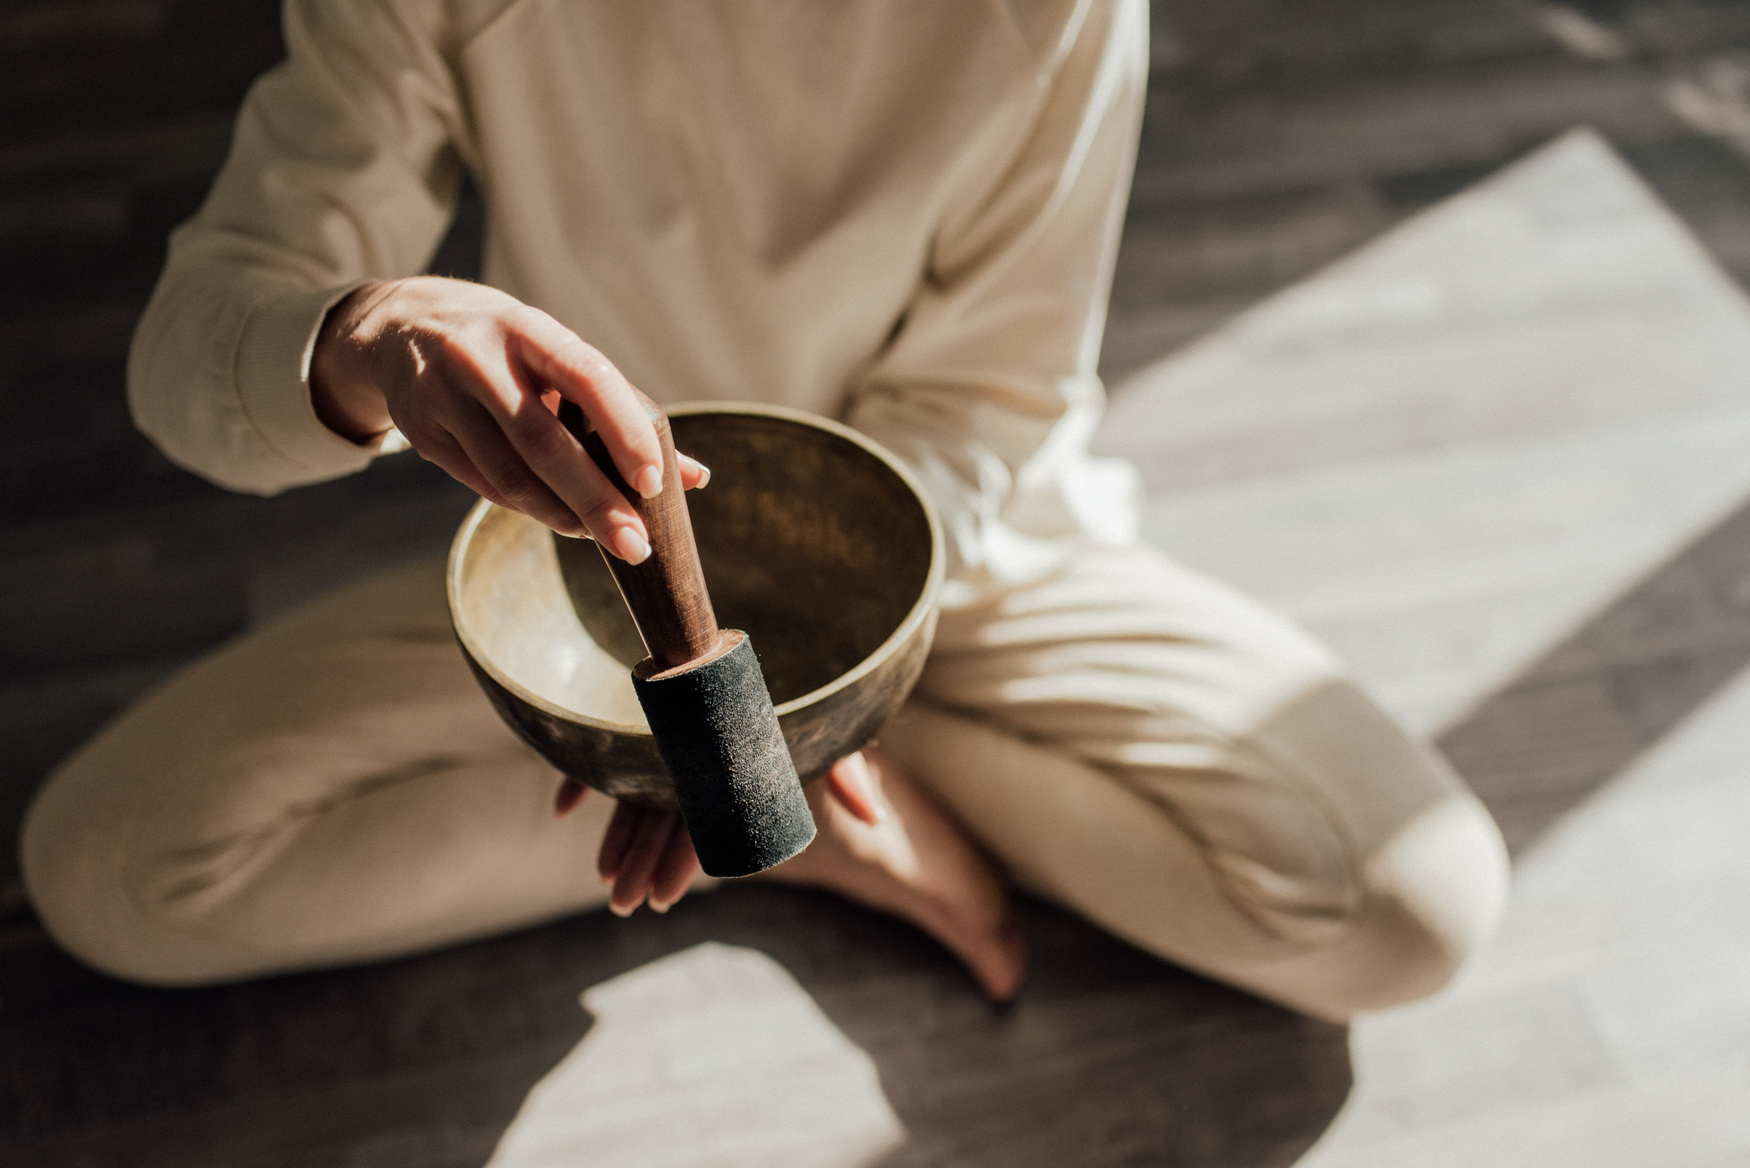  A Person Using a Tibetan Singing Bowl while Sitting on the Floor